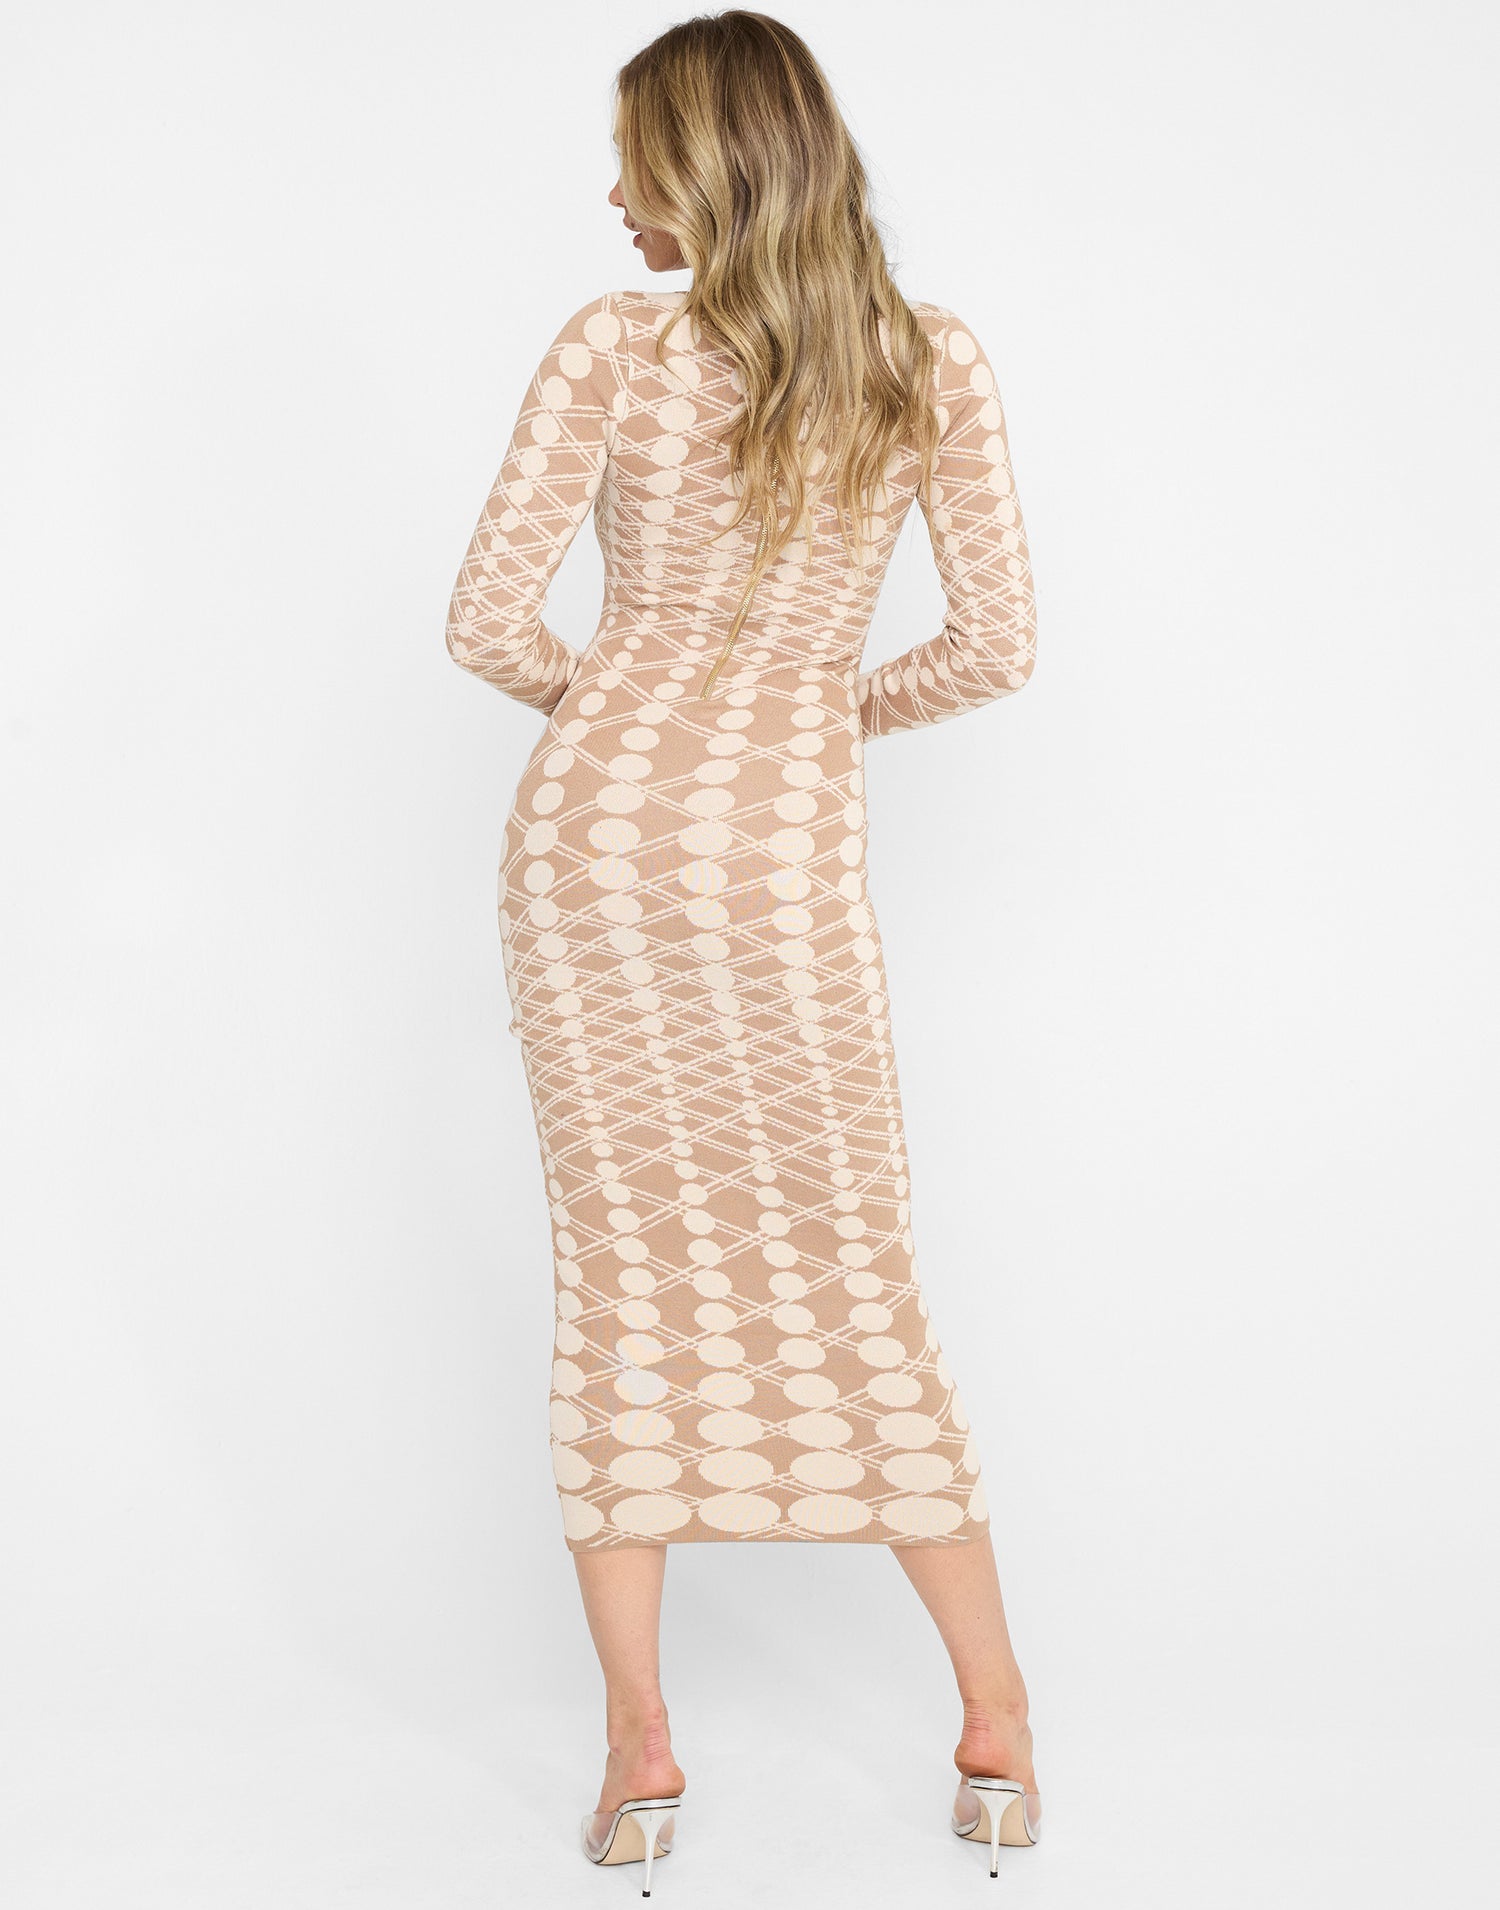 Quincy Midi Dress by Summer Haus in Mocha/Cream - Back View